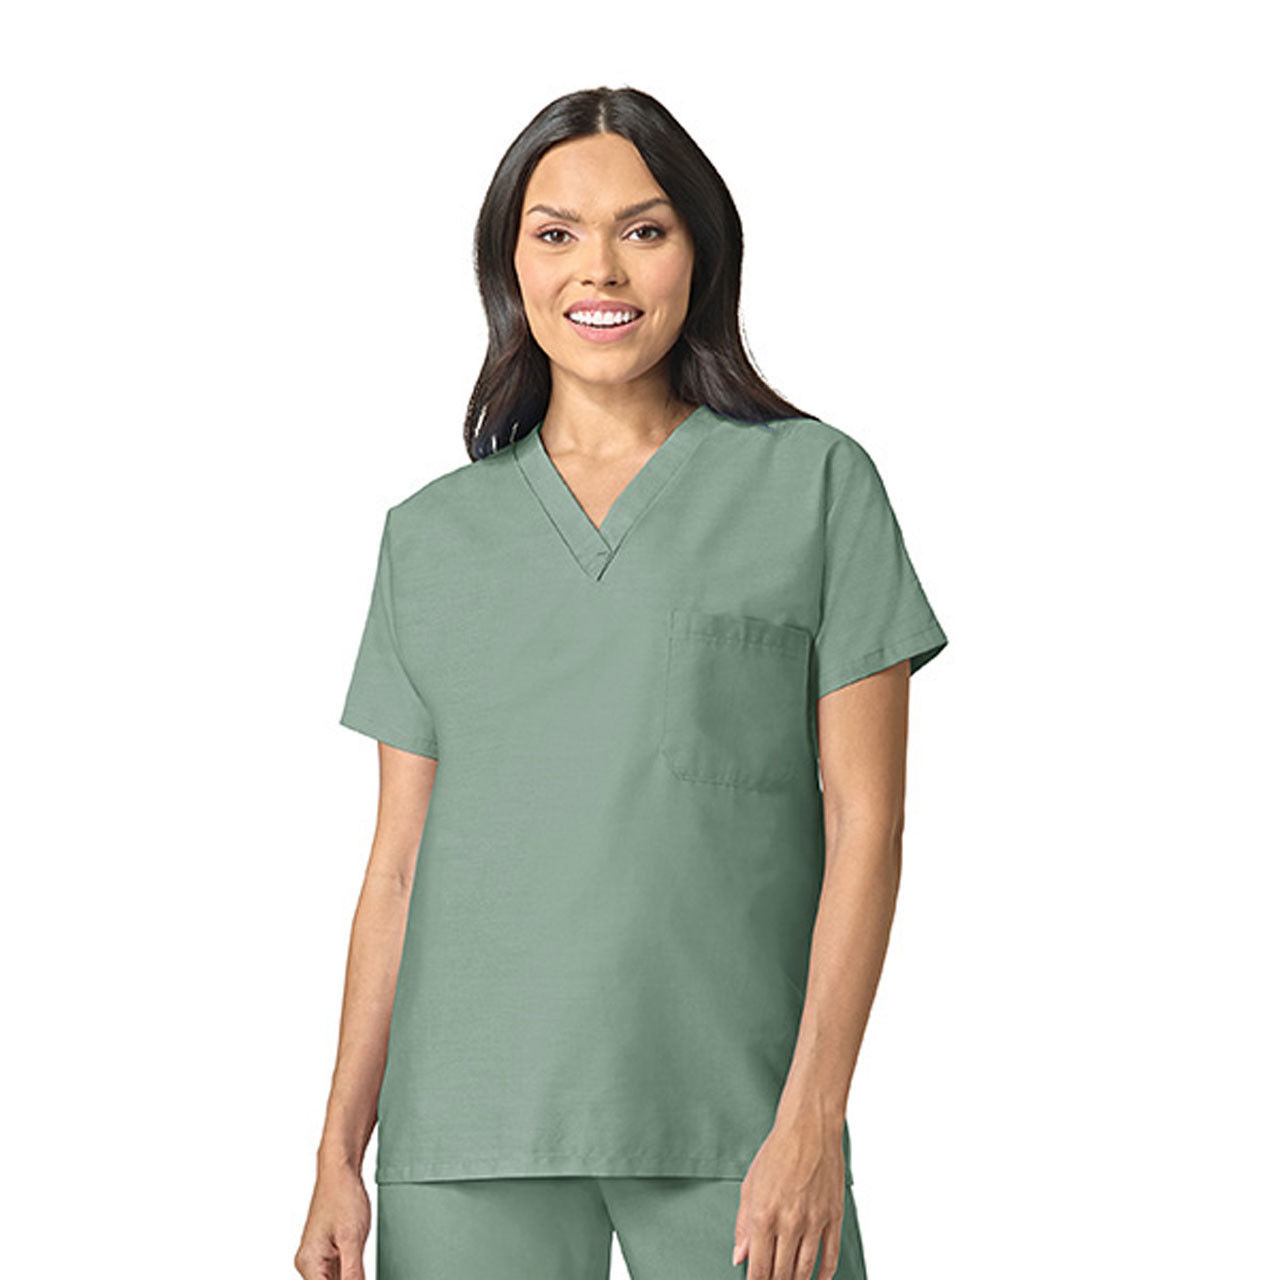 Is the fabric of the sage green scrubs pure cotton?